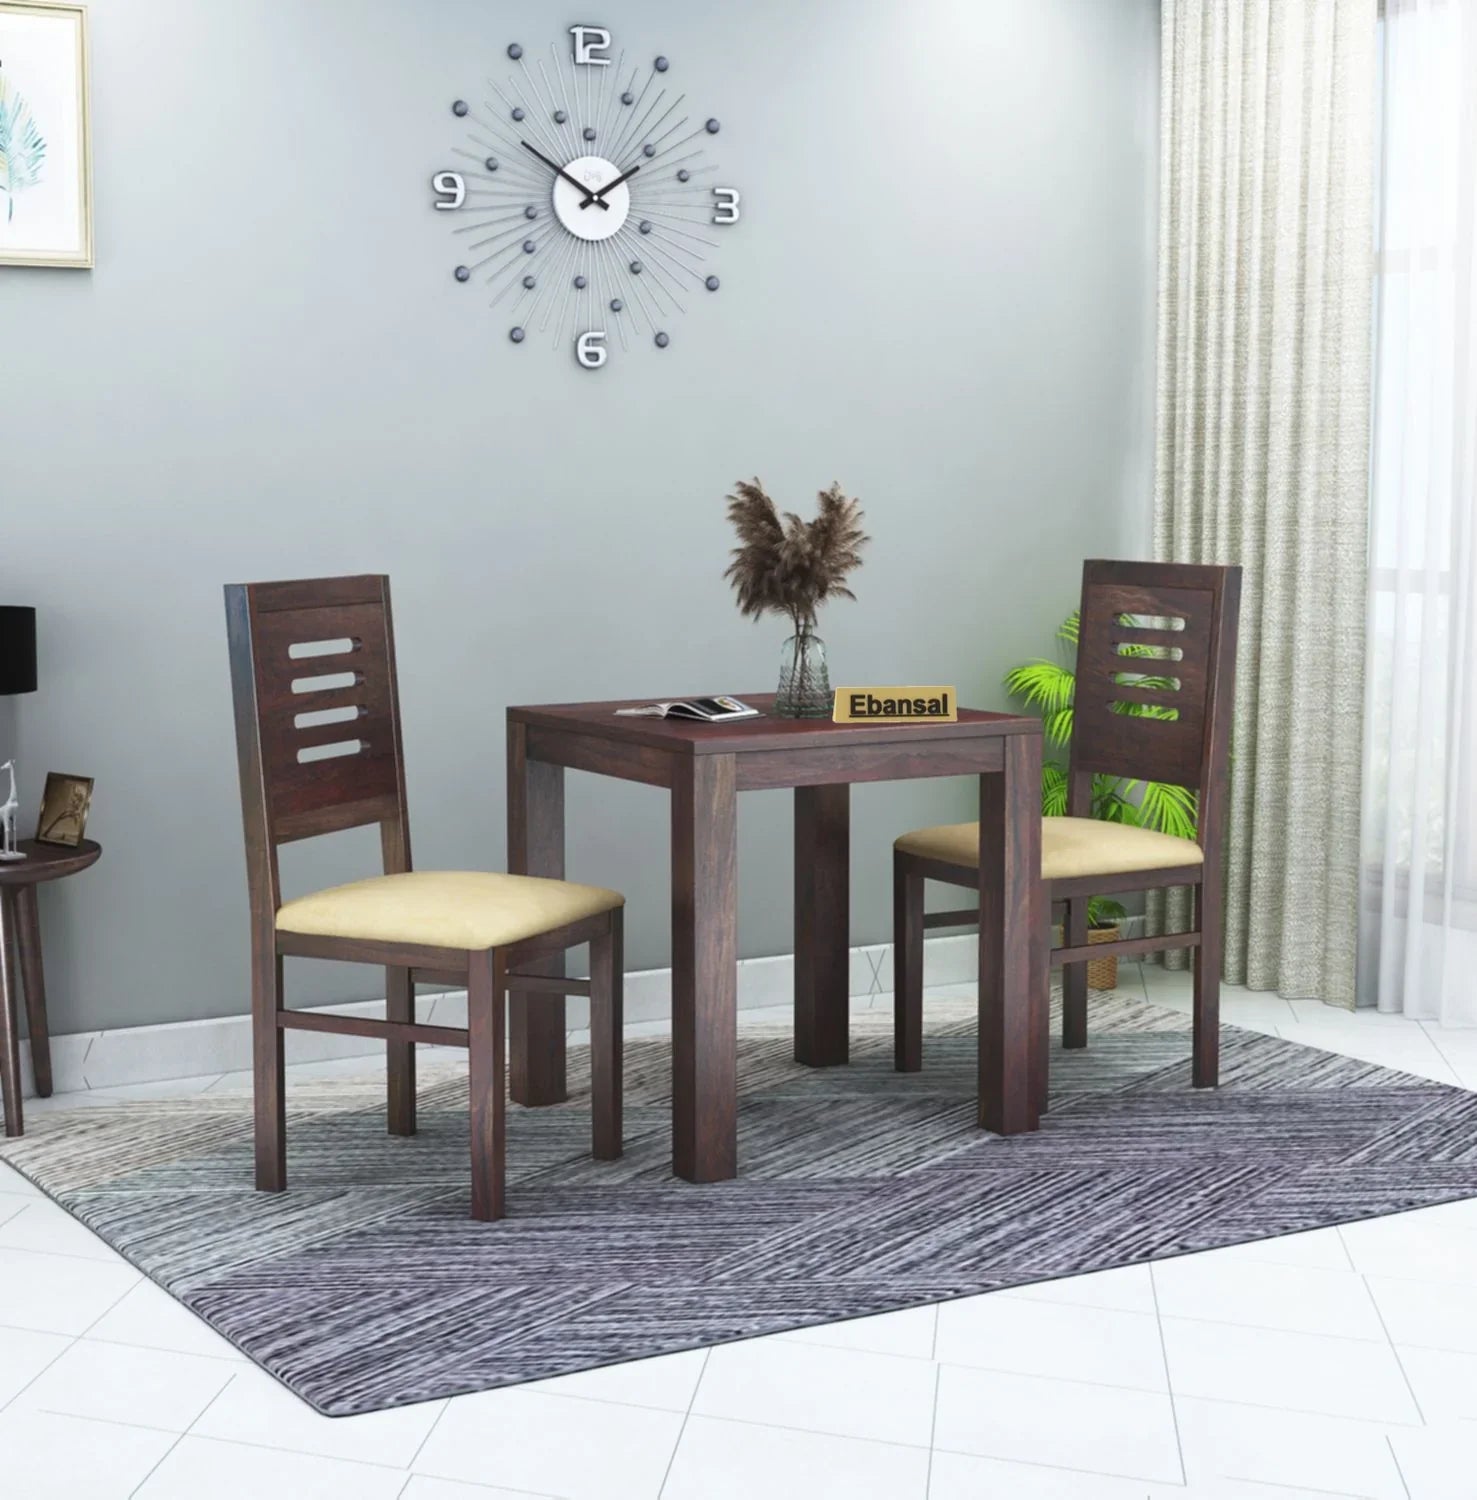 2 Seater Dining Sets